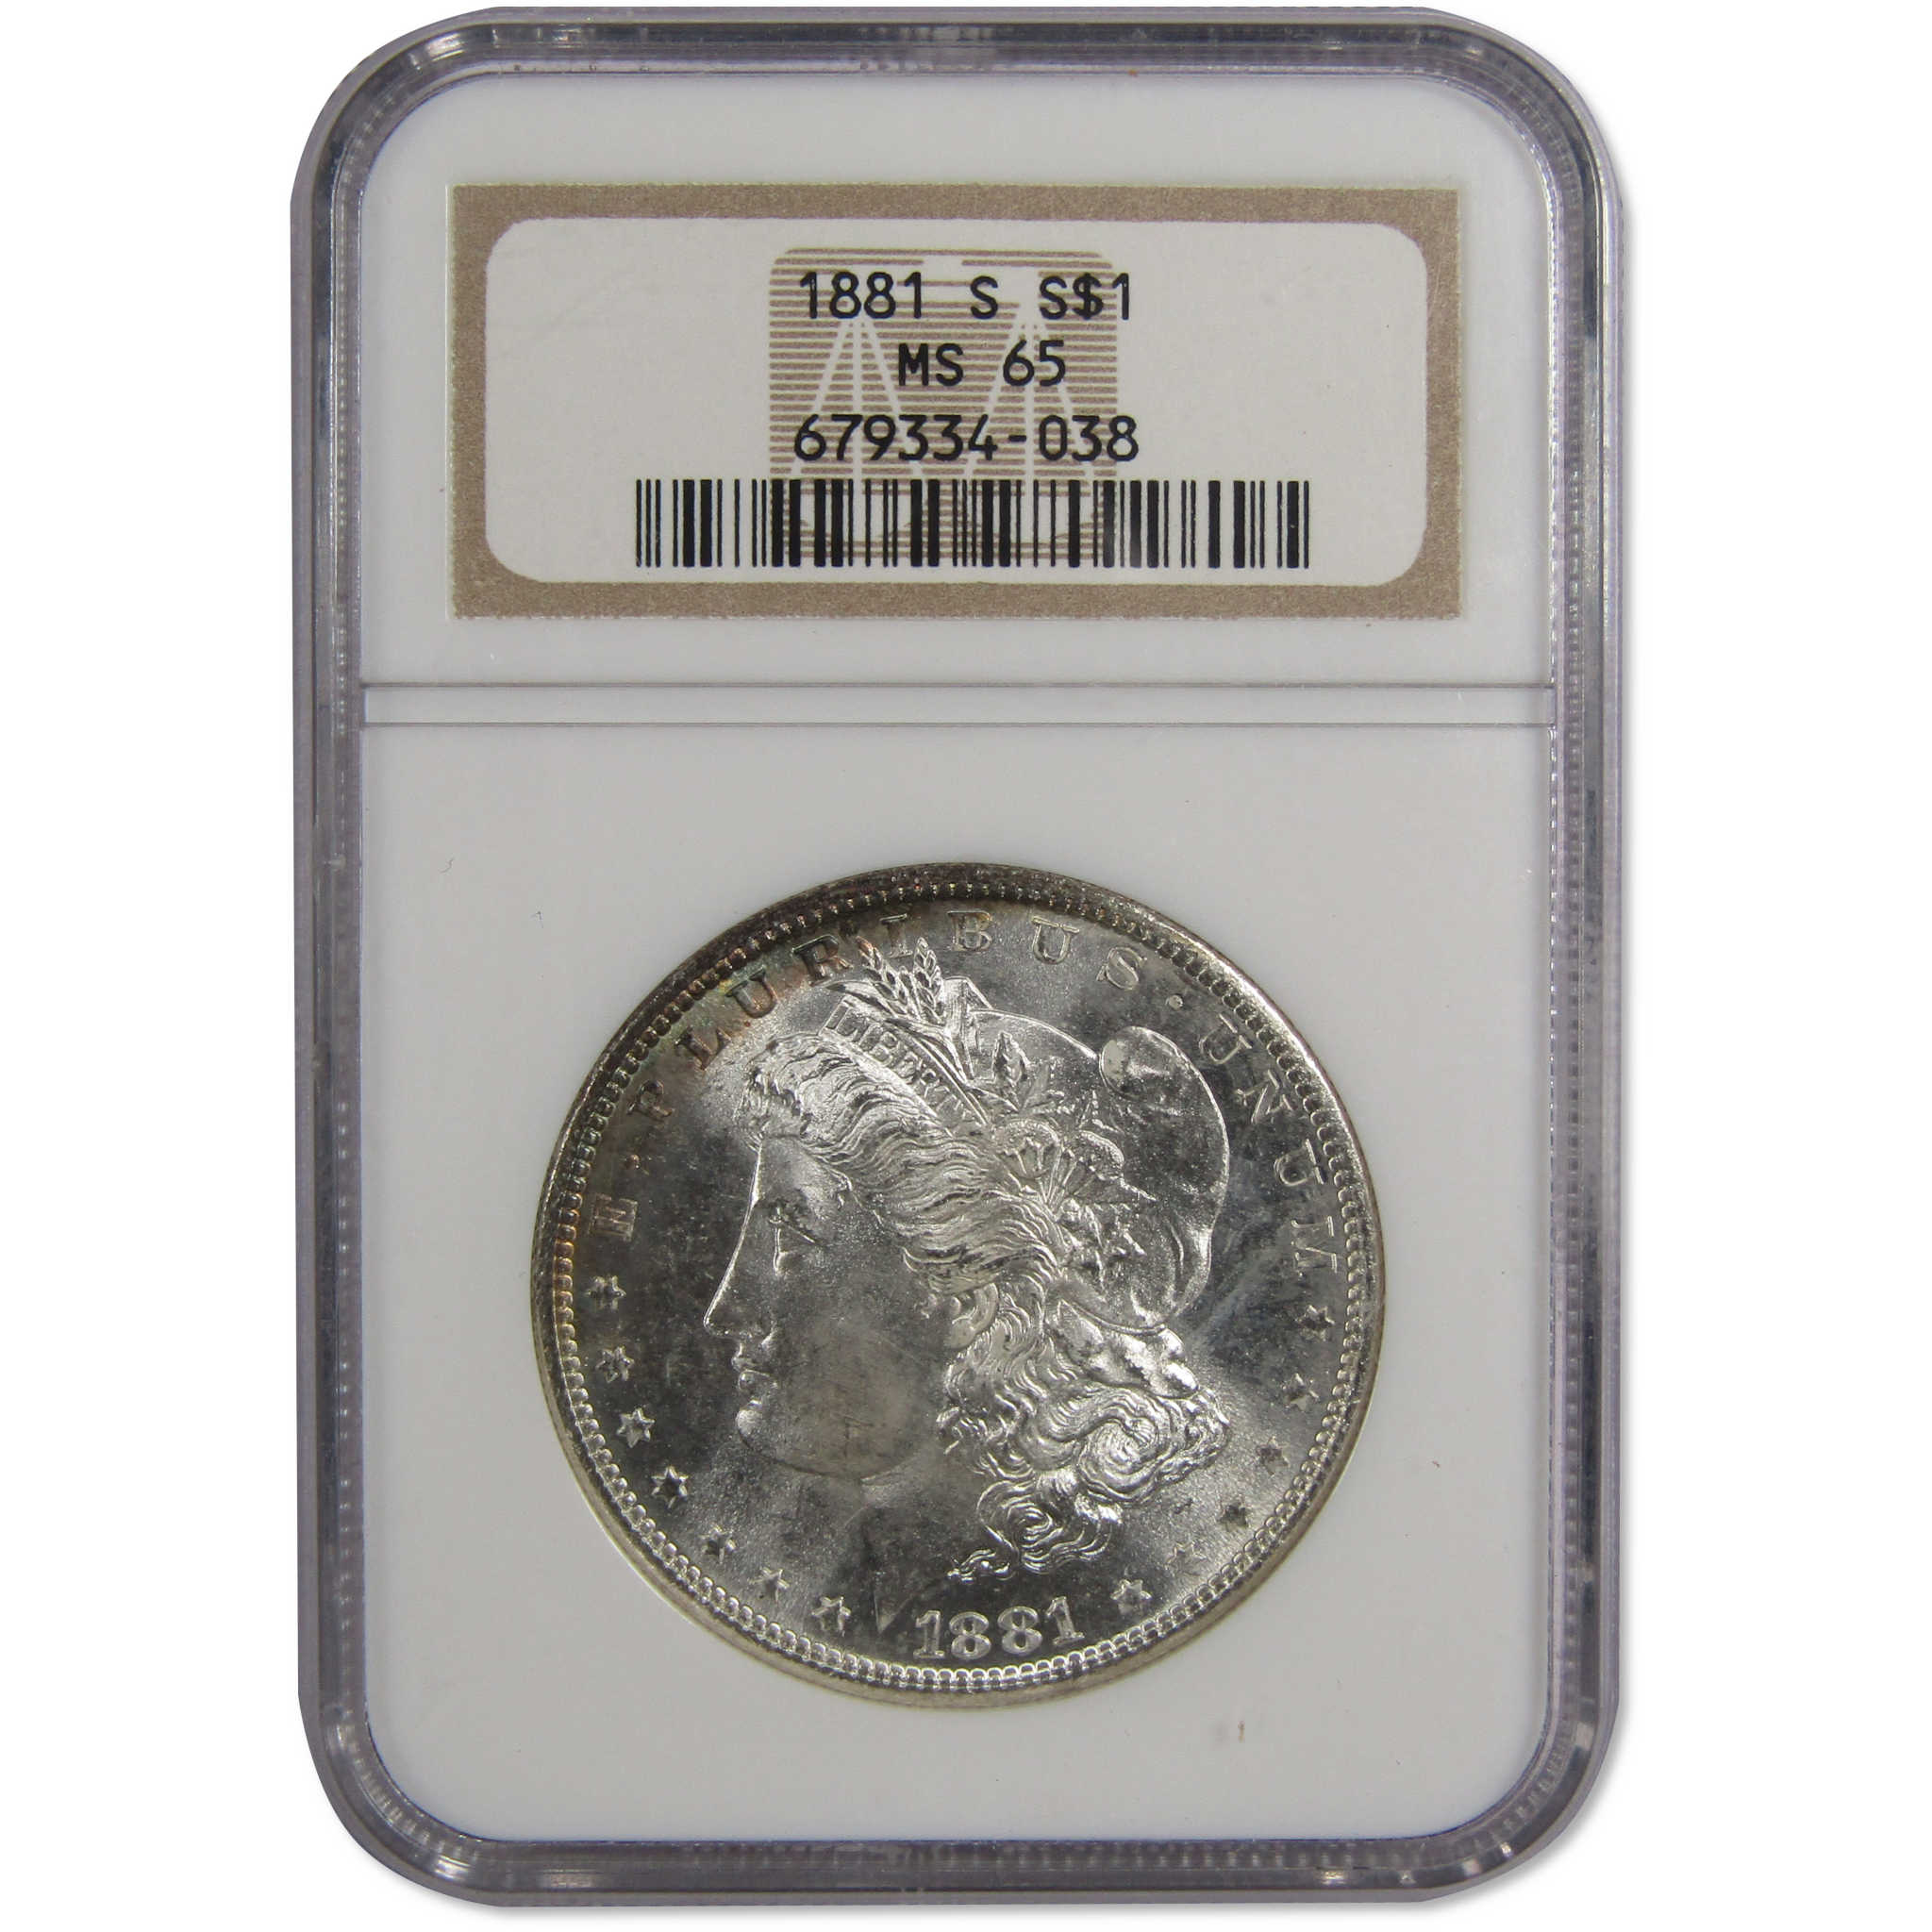 1881 S Morgan Dollar MS 65 NGC 90% Silver Uncirculated SKU:IPC7214 - Morgan coin - Morgan silver dollar - Morgan silver dollar for sale - Profile Coins &amp; Collectibles